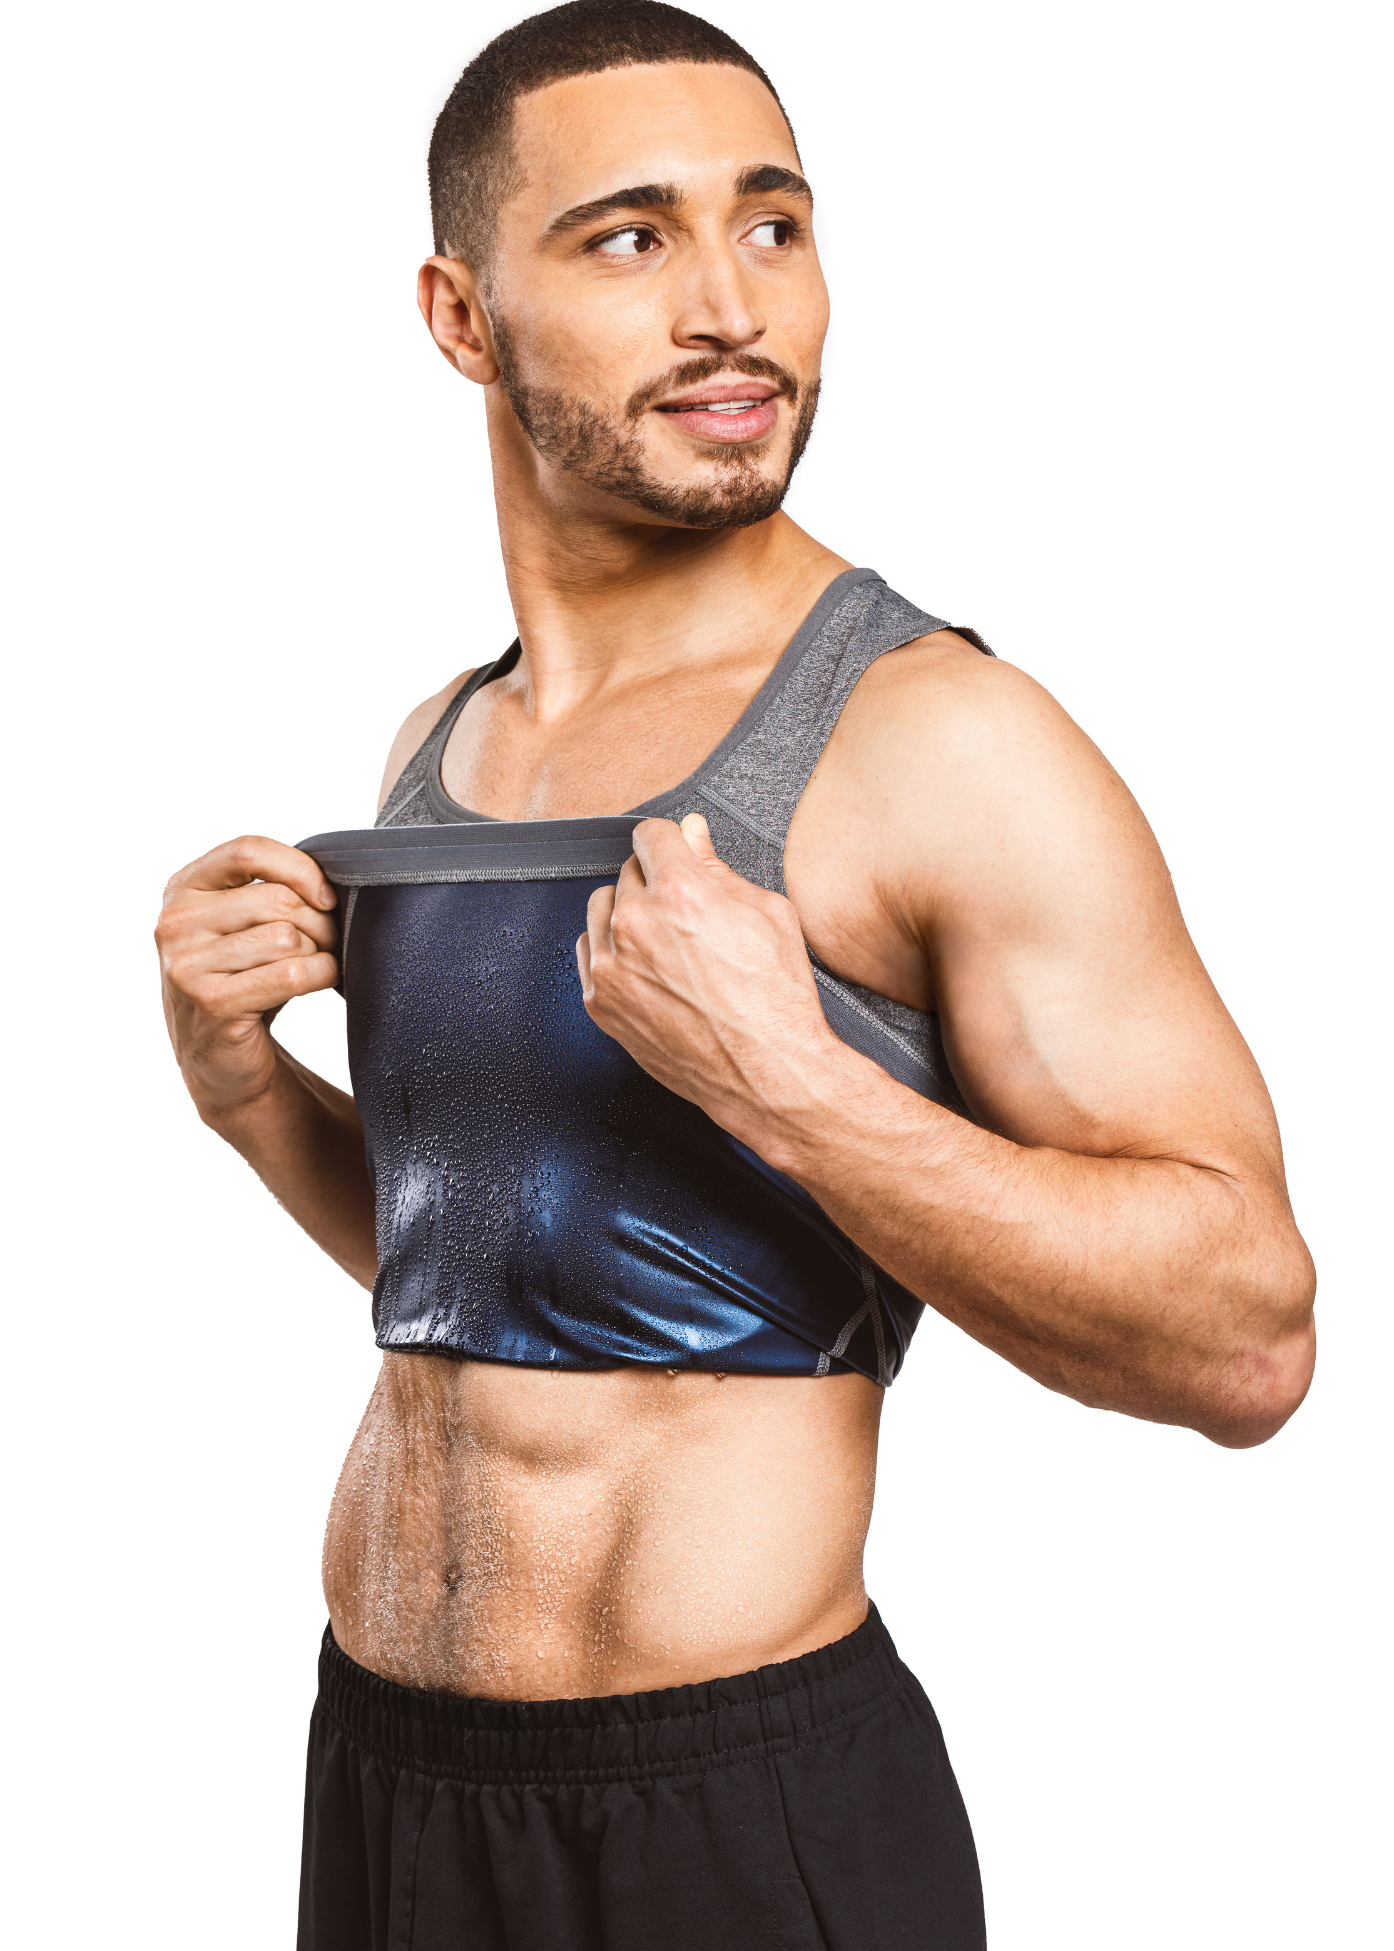 Sweat Shaper™ Official Site – Sweat Enhancing Compression Wear